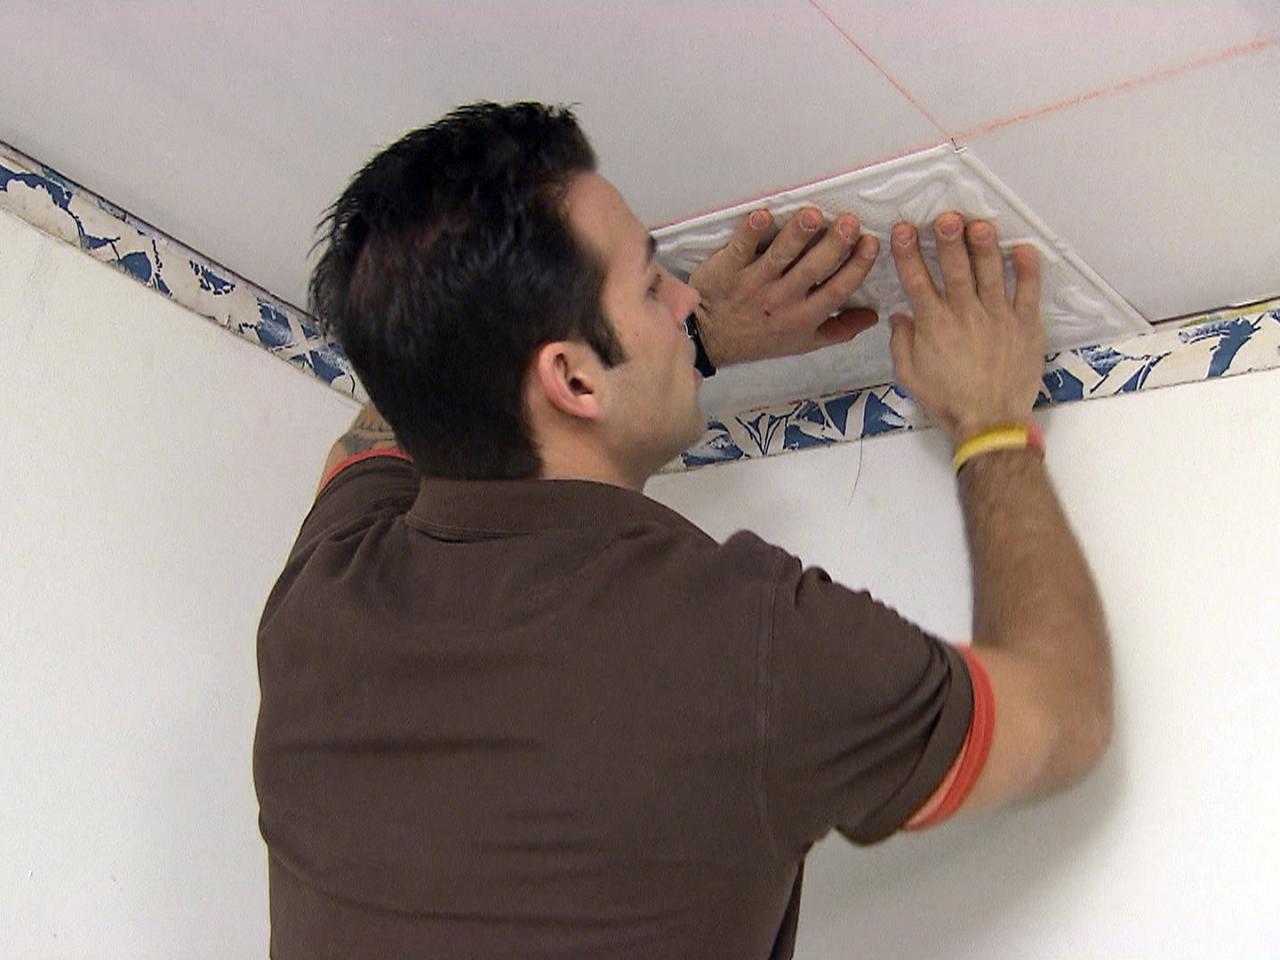 How To Install A Tin Tile Ceiling, Faux Tin Ceiling Tiles Installation